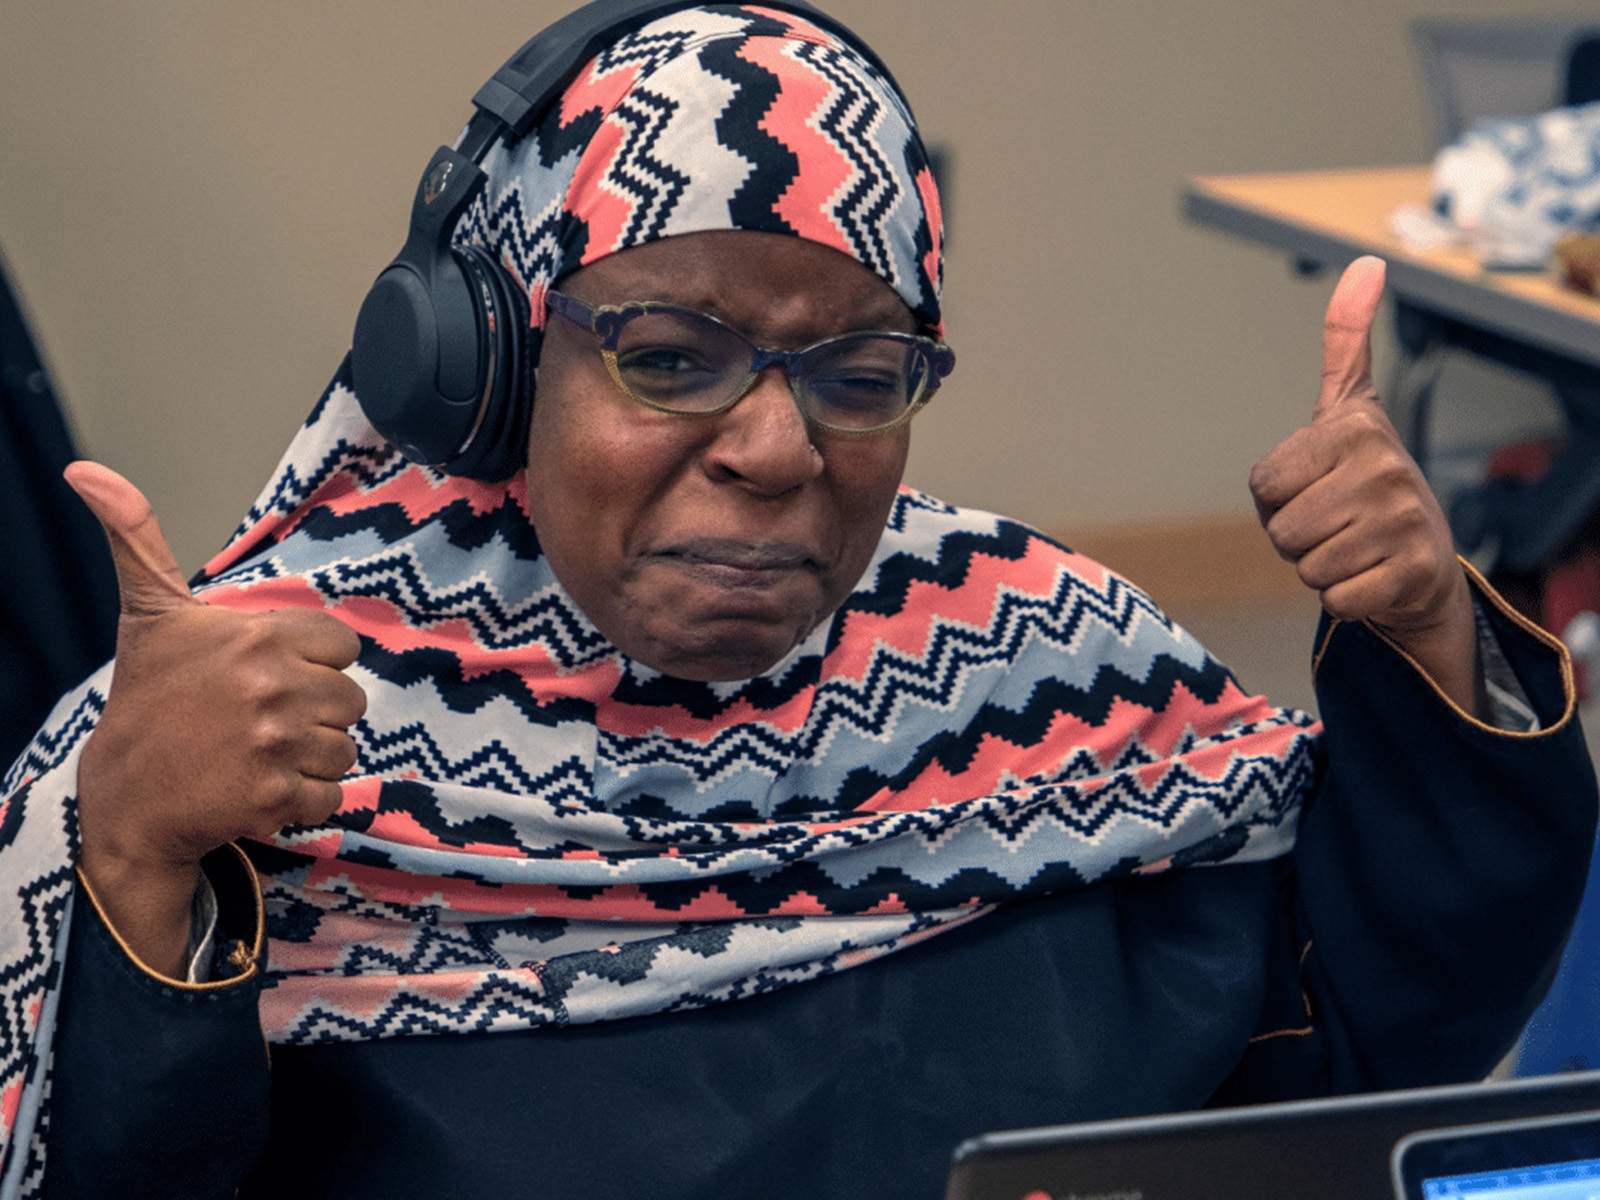 A photo of a woman wearing headphones, sitting in front of a computer holding two thumbs up.